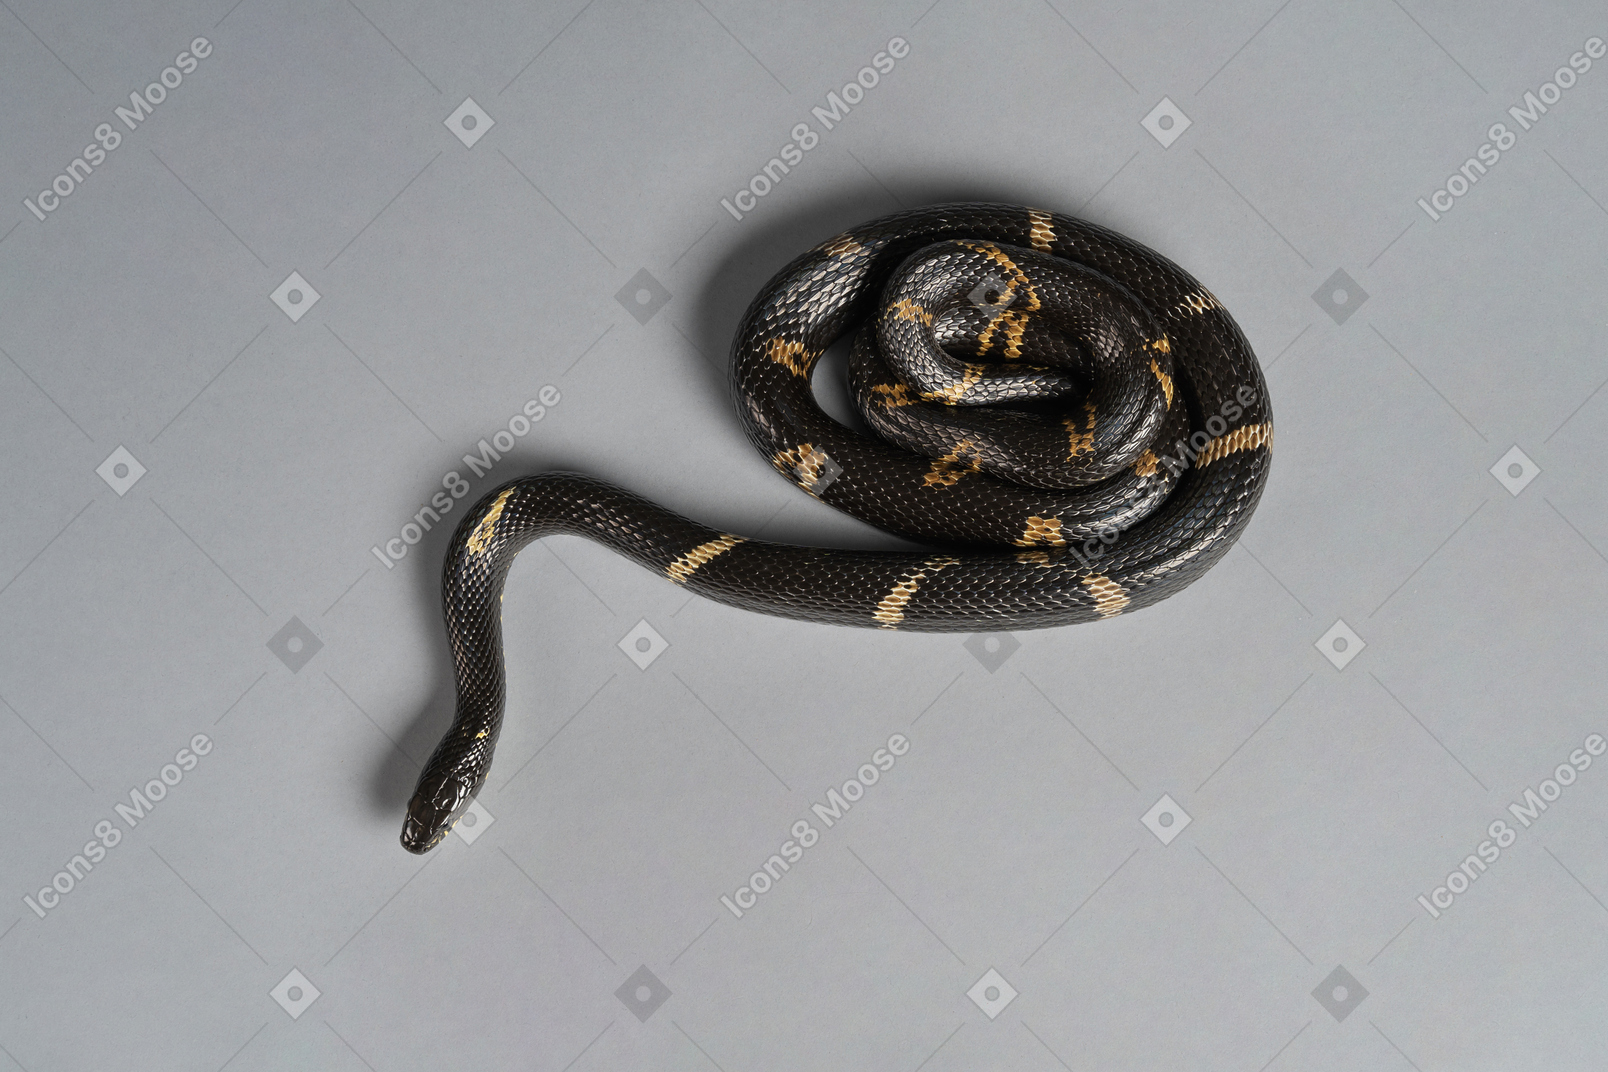 Striped black snake lying in rounds